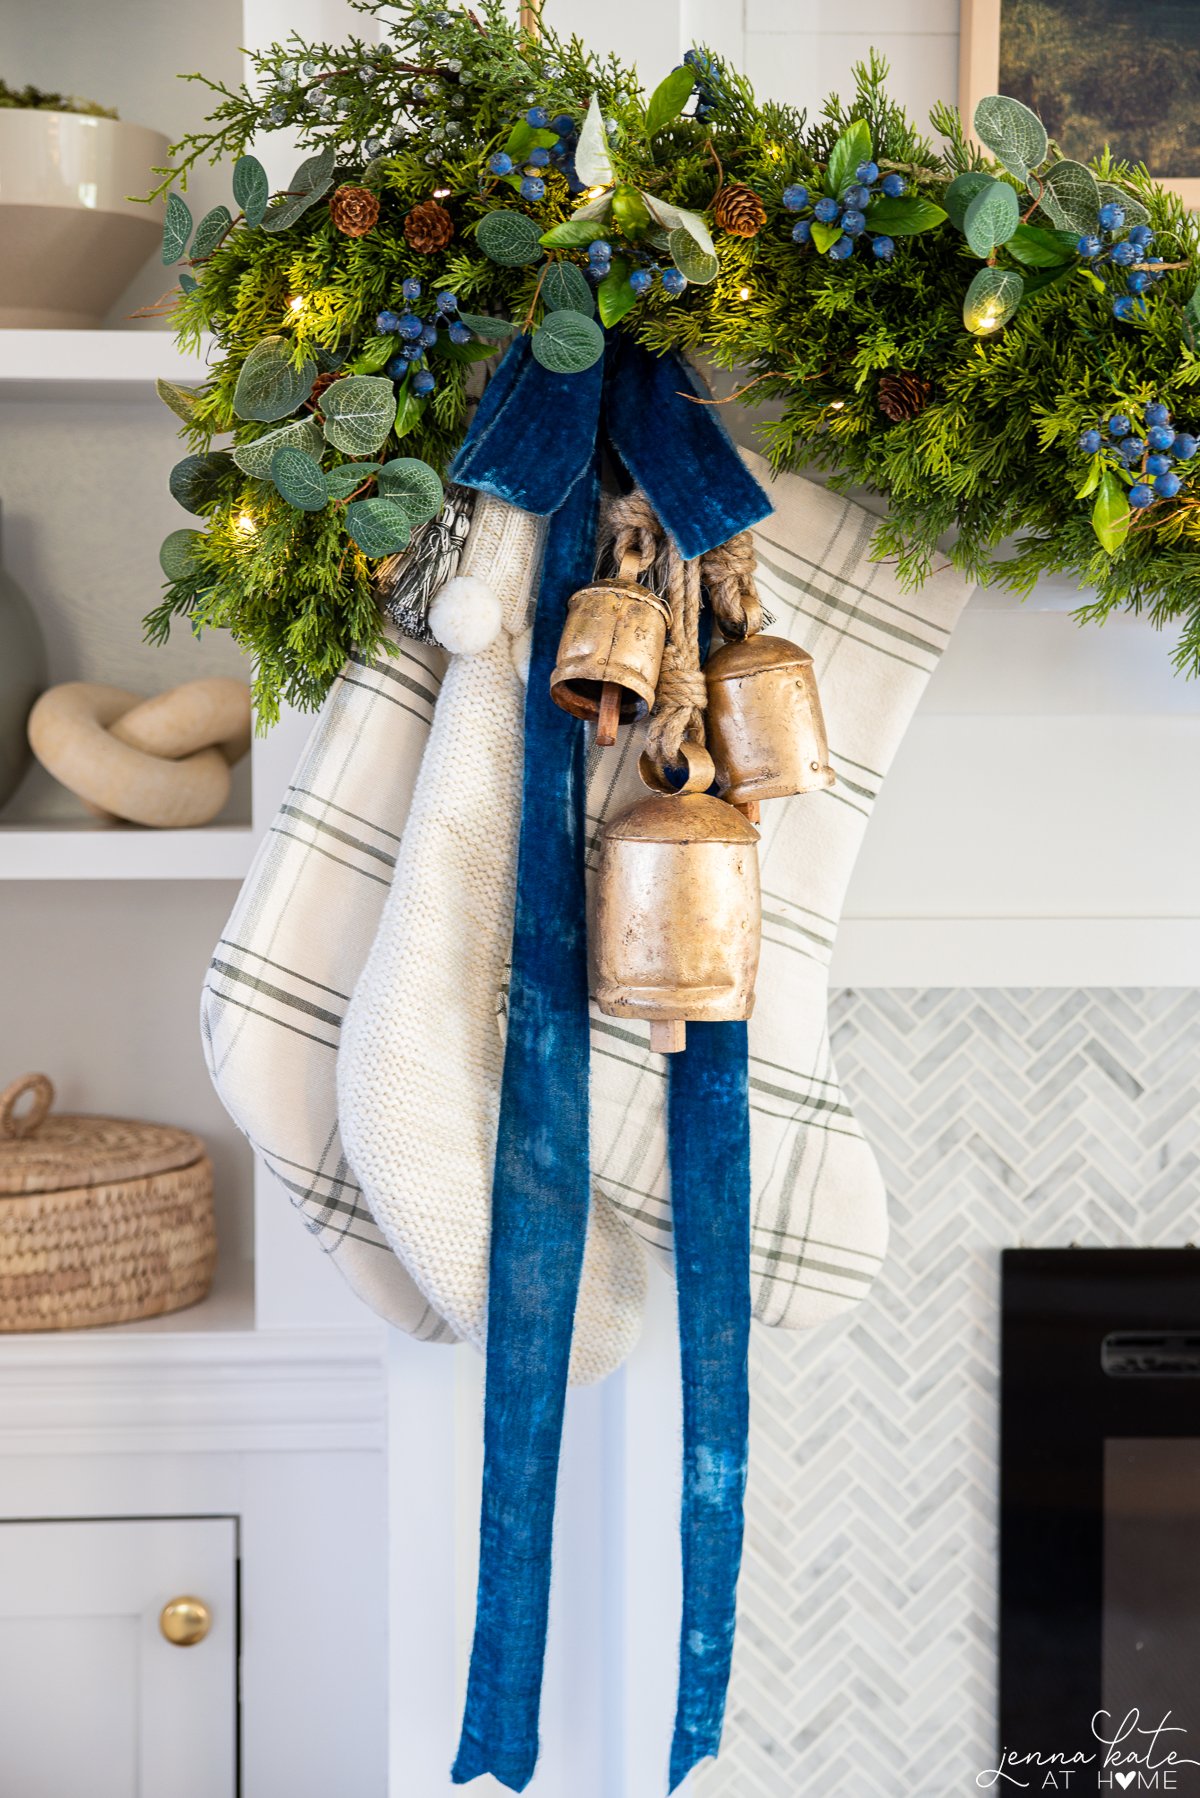 A close up picture of stockings with gold bells and blue ribbons hanging off the mantel.